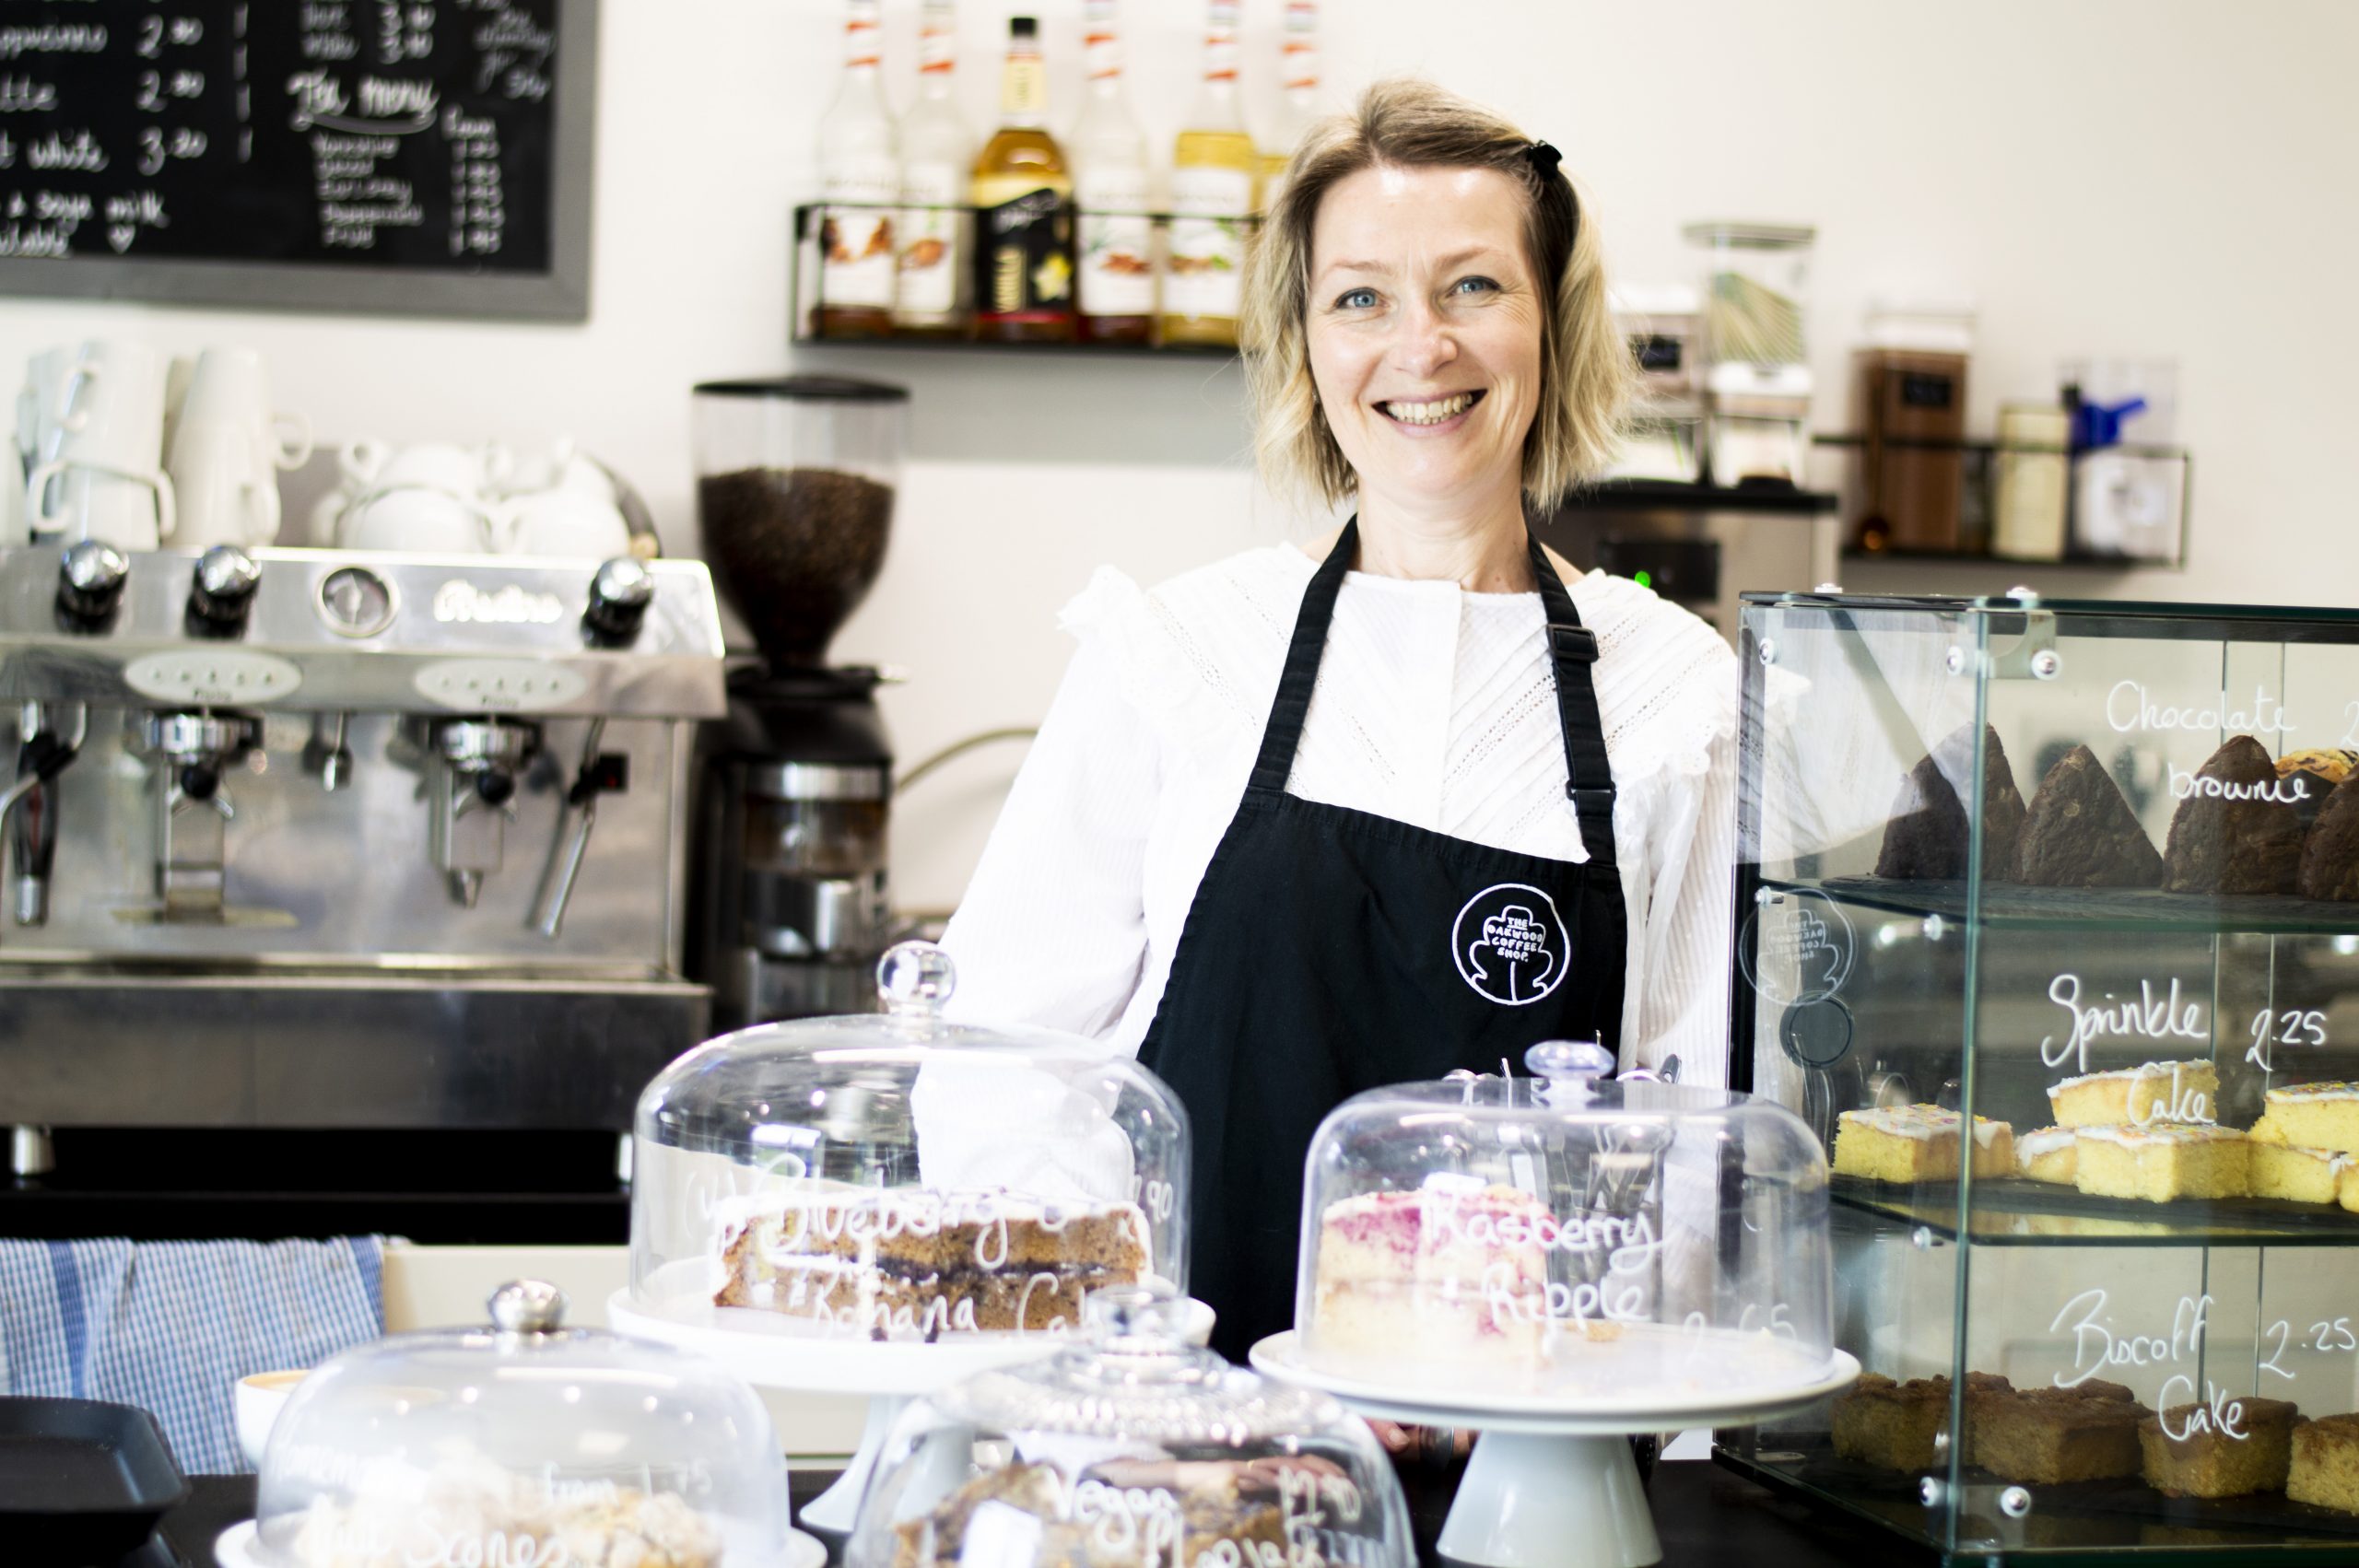 An Oakwood Coffee Shop worker standing at the counter, she is looking at the camera and smiling